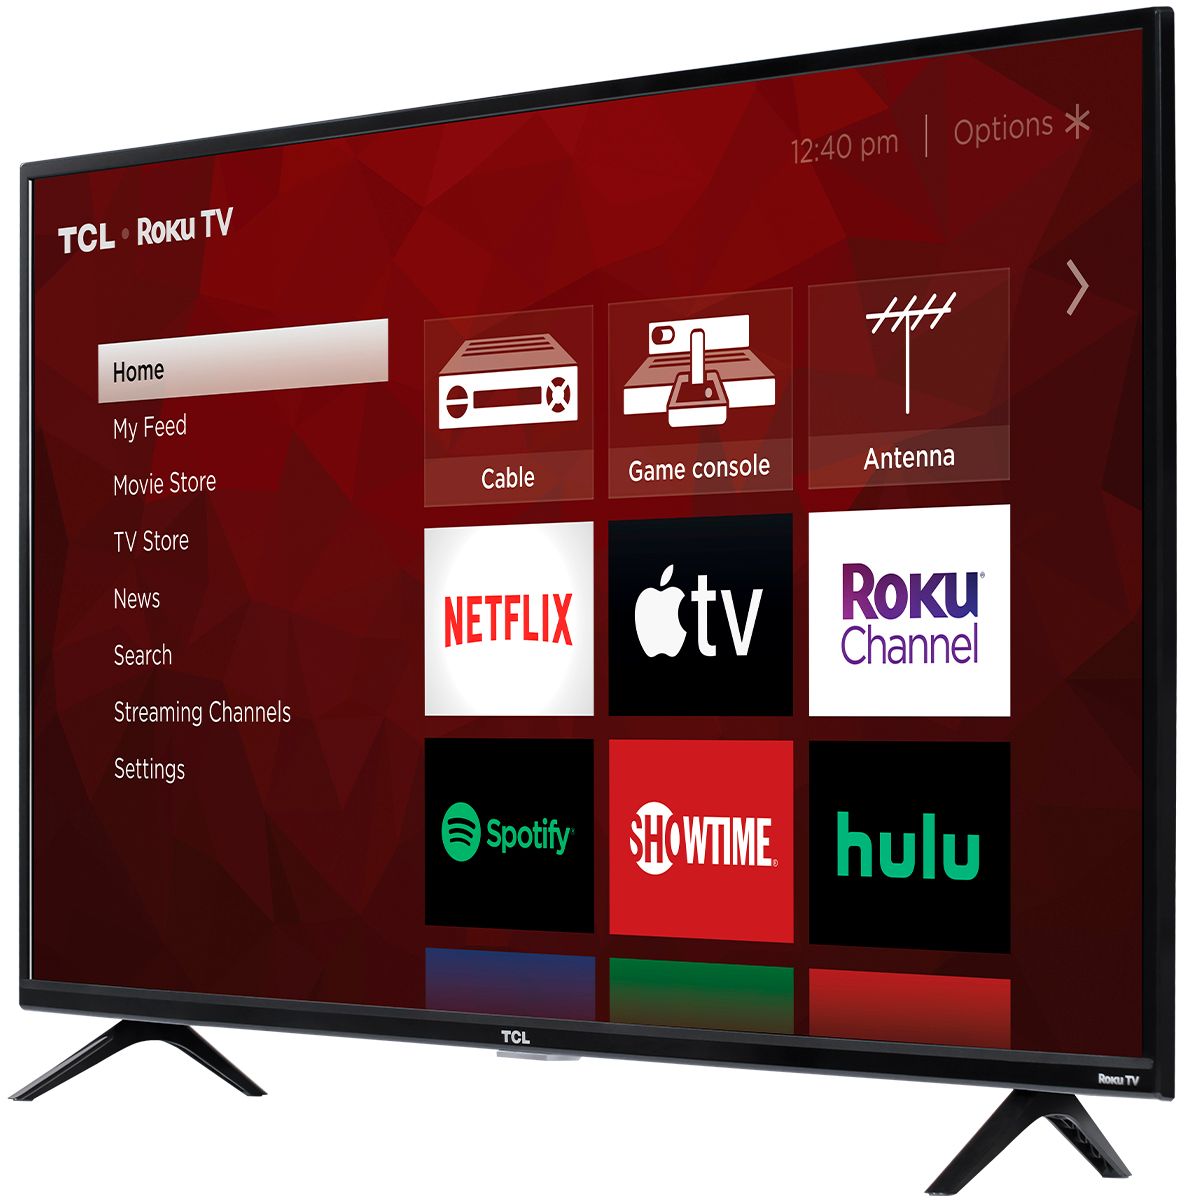 Tcl 55 inch tvs • Compare (16 products) see prices »